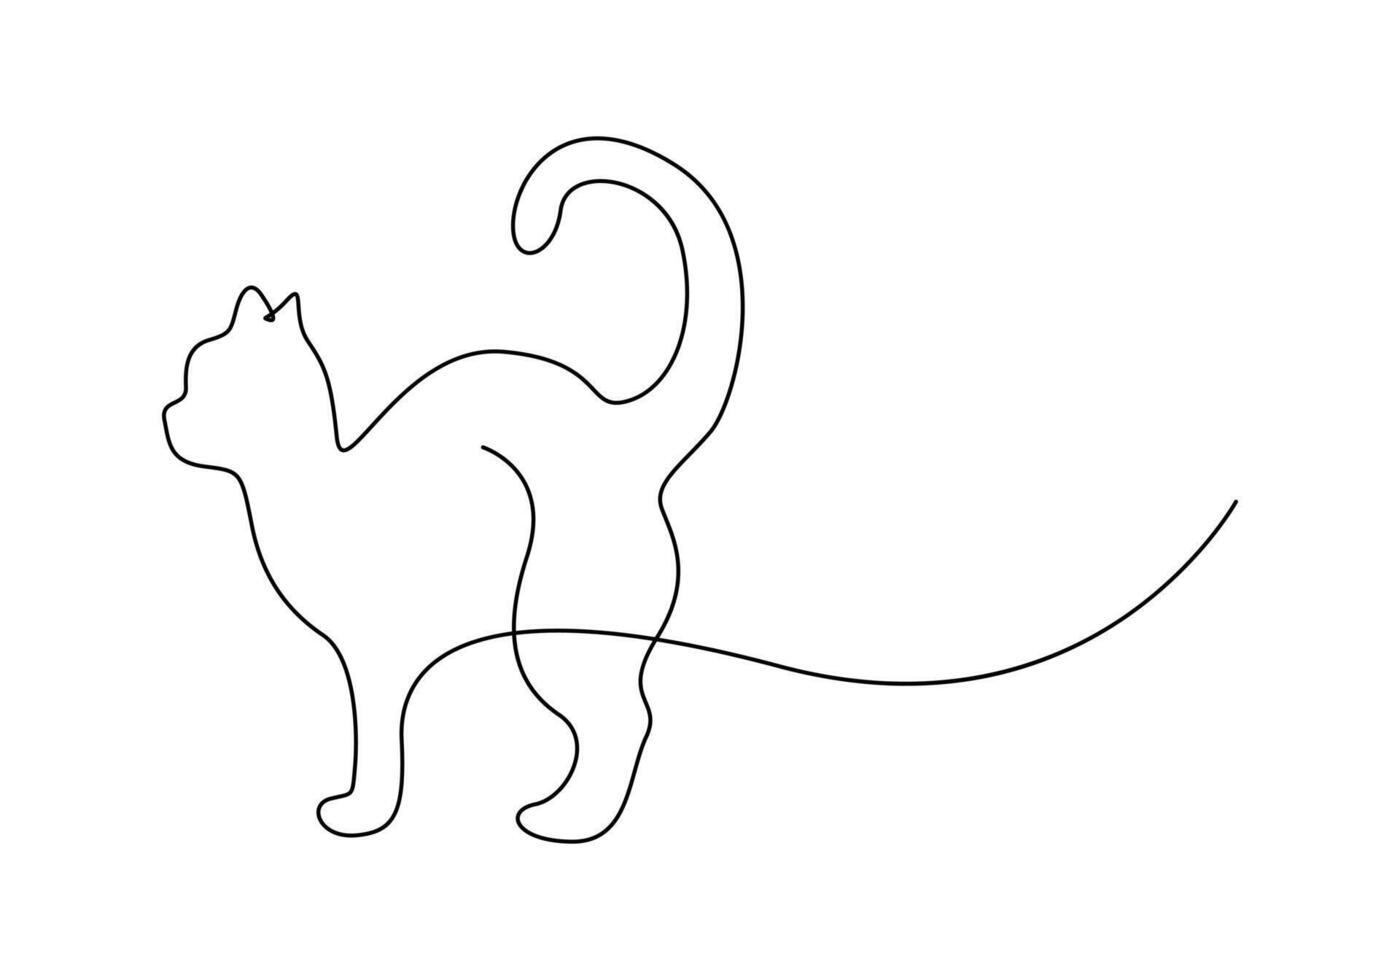 Continuous one line drawing of cute cat vector illustration